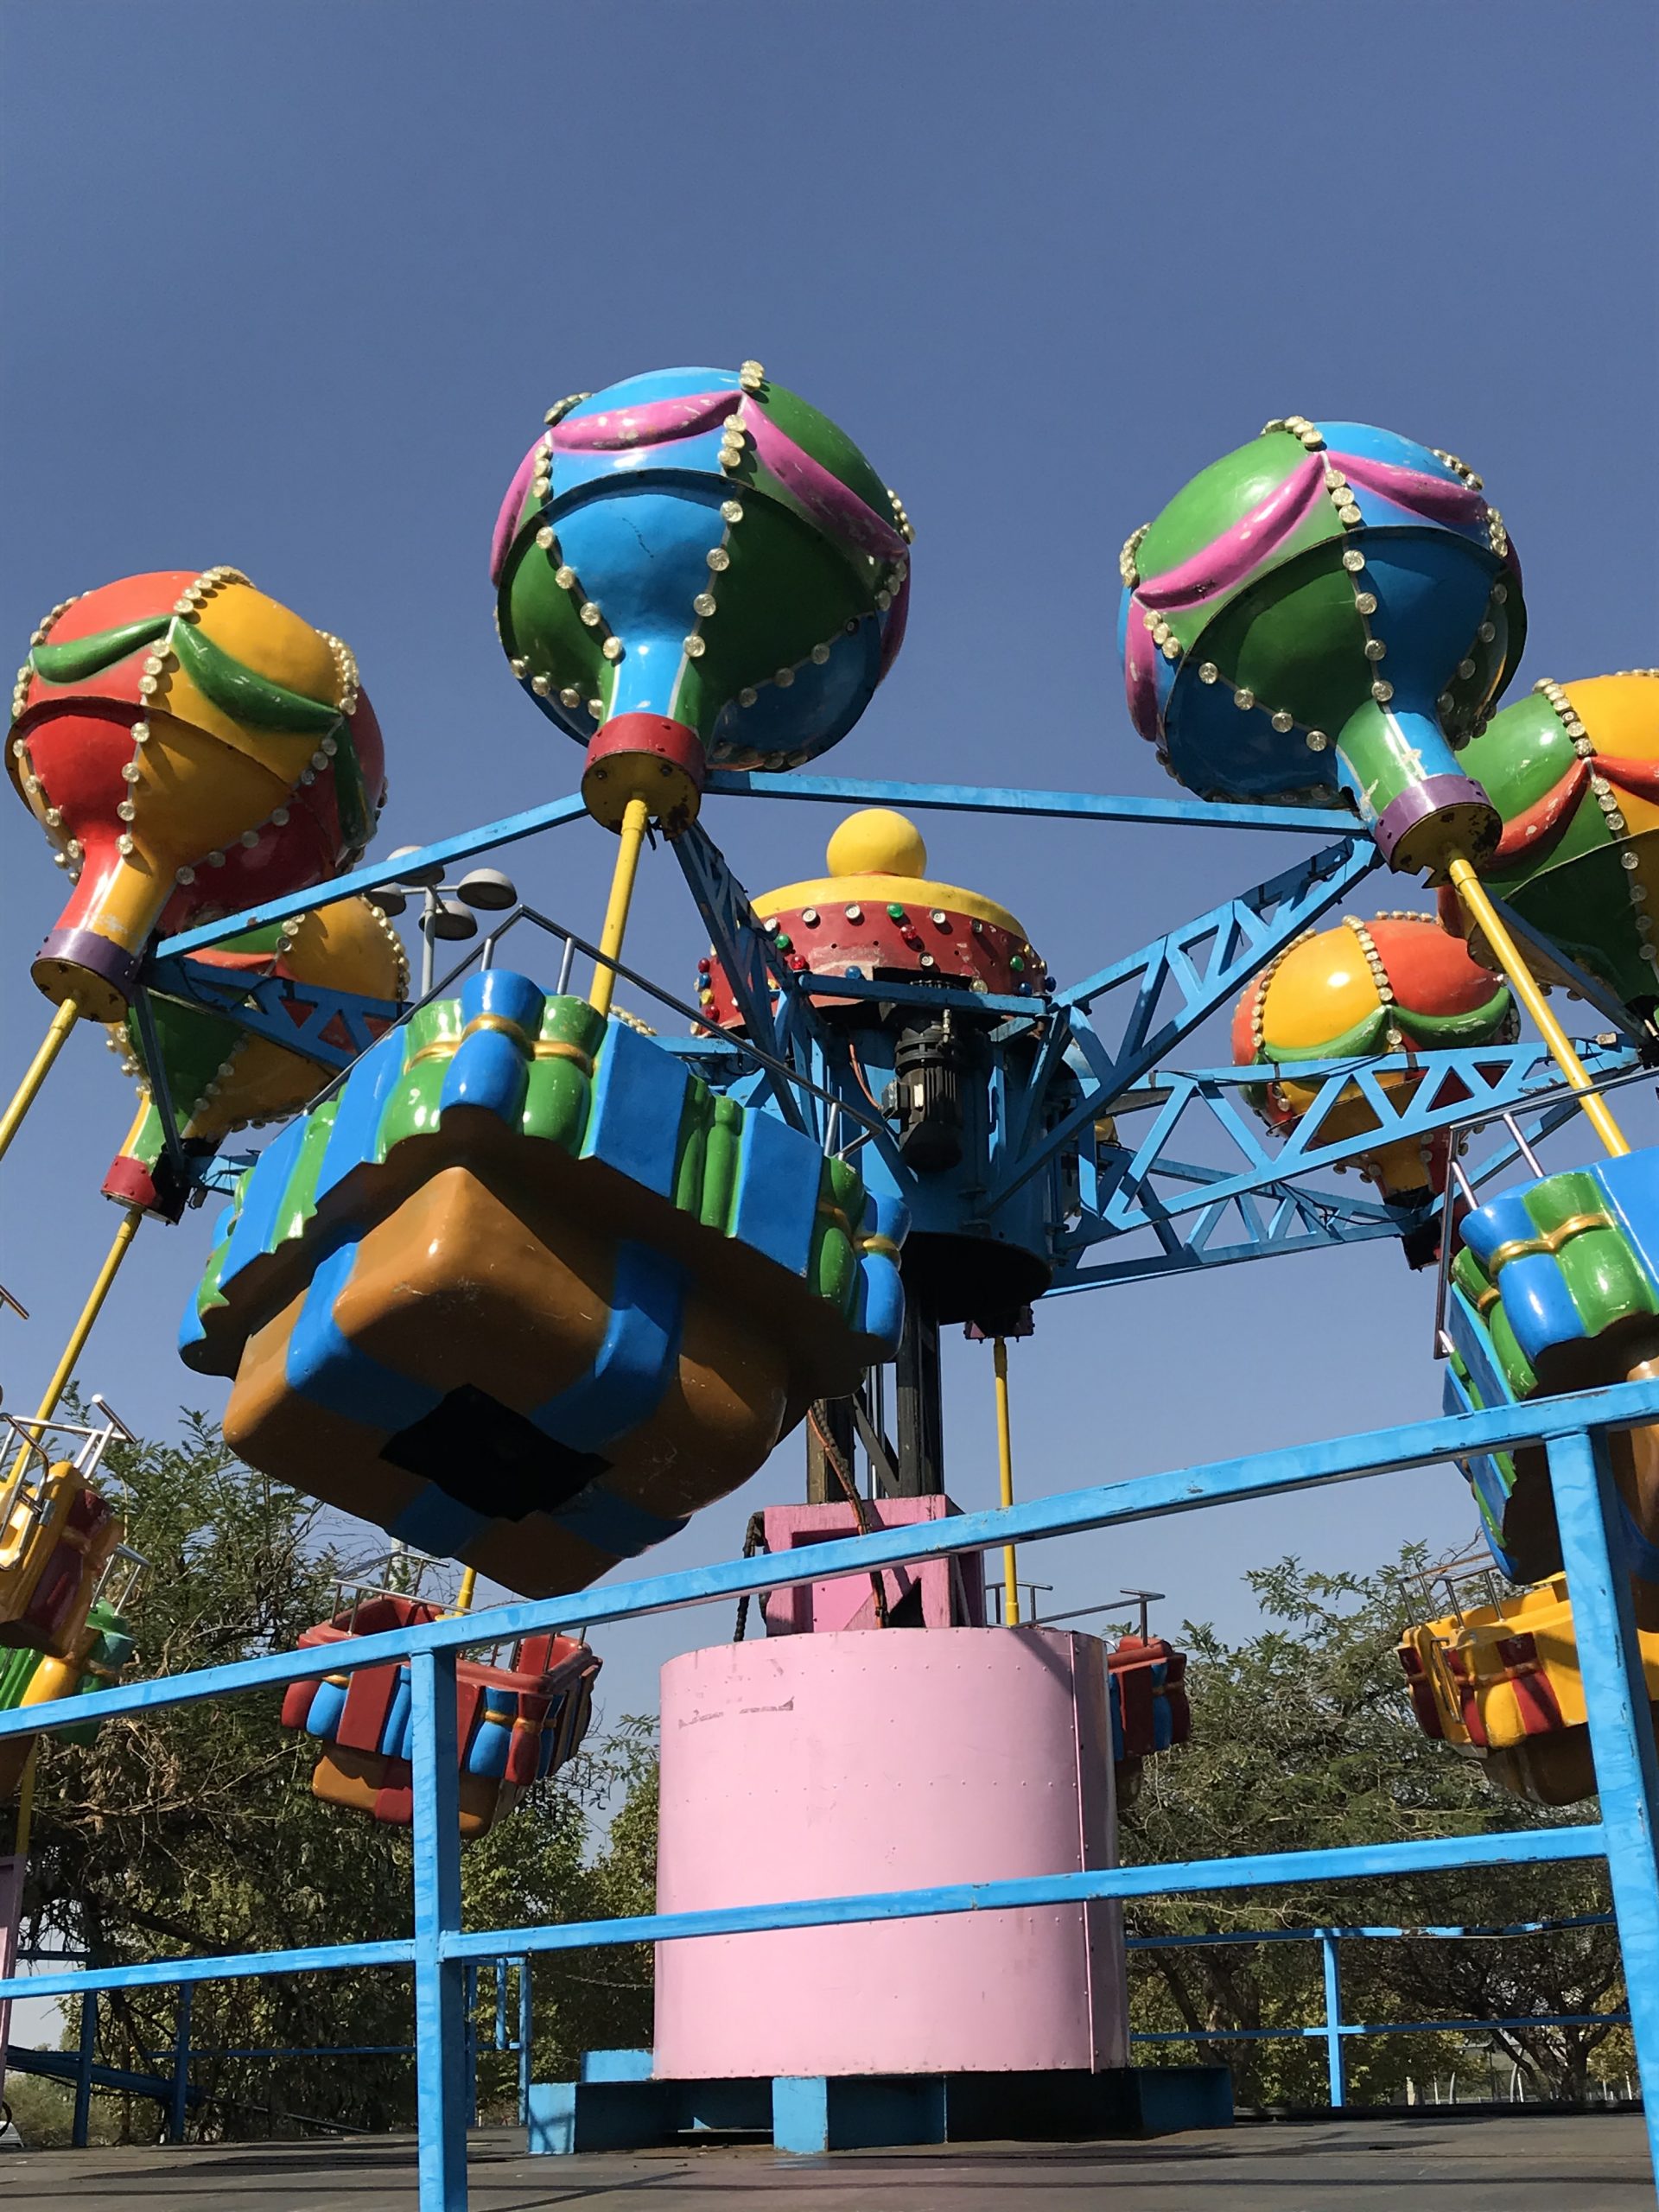 Enjoy a Fun Family Day Out At The Maponya Carnival